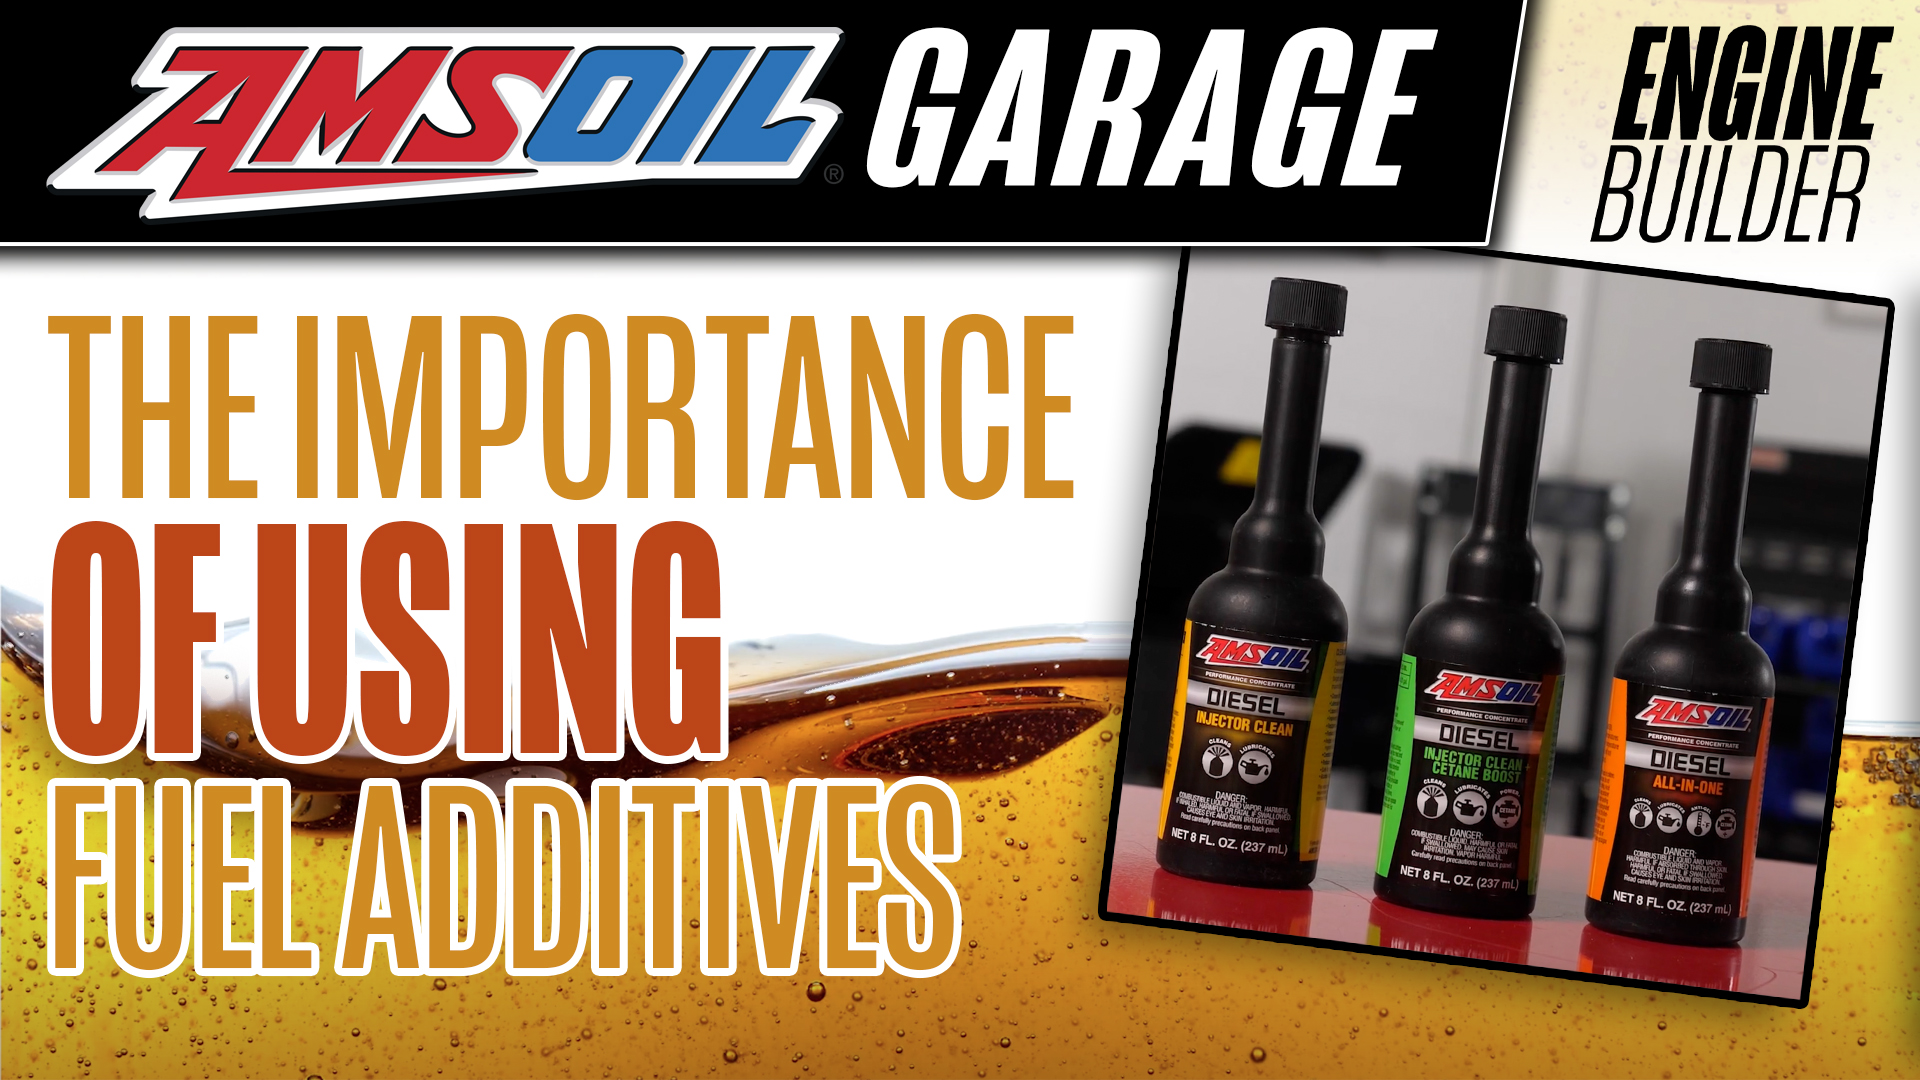 The Importance of Using Diesel Fuel Additives - Engine Builder